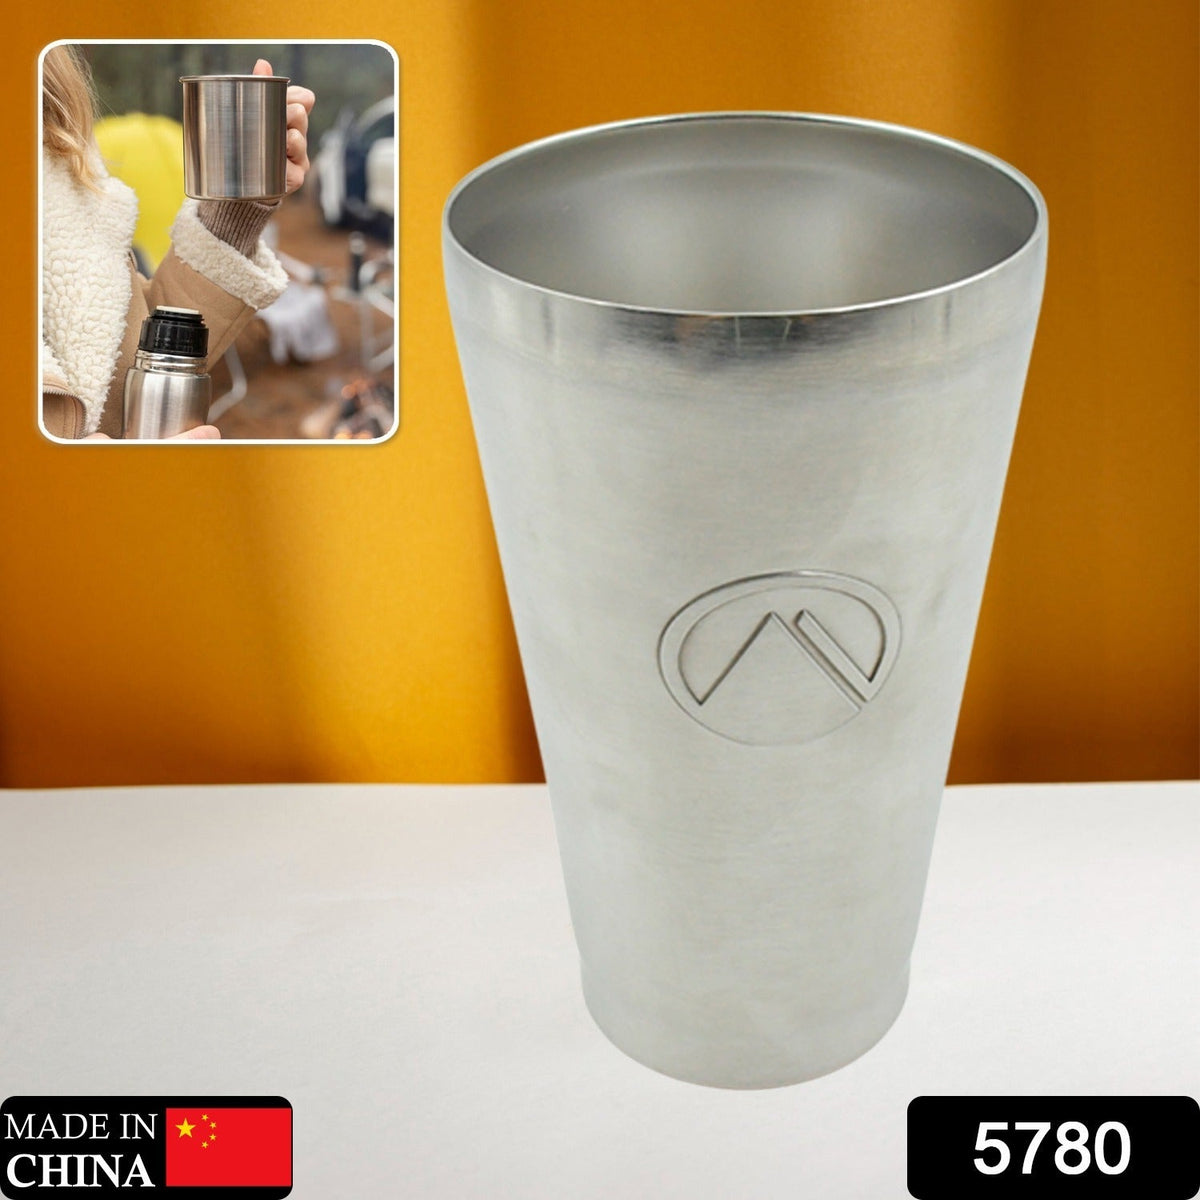 5780 Stainless Steel Vacuum Insulated Travel Mug/ Glass Reusable Water Glass/Serving Unbreakable Drinking Glasses Plain Design for Everyday Use Drinks Water, Tea Mug, Outdoor, Home, Office (1 Pc)